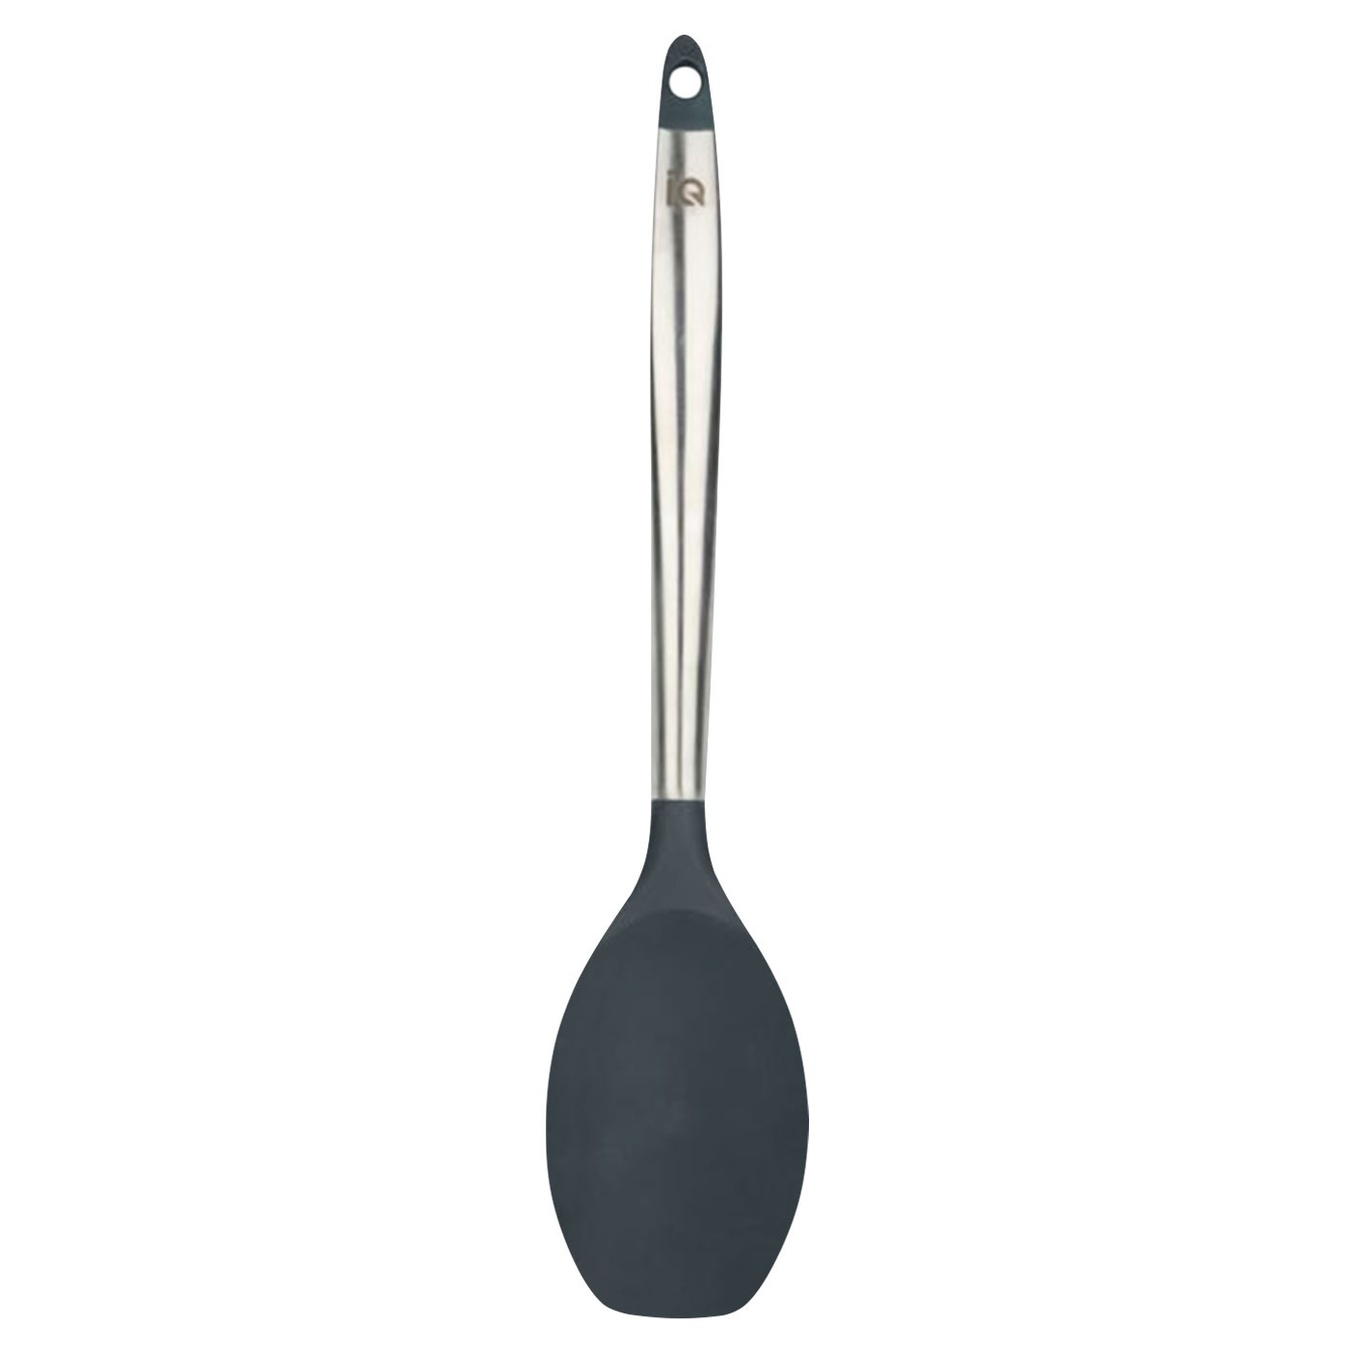 The Ringel IQ Be Smart spatula is round